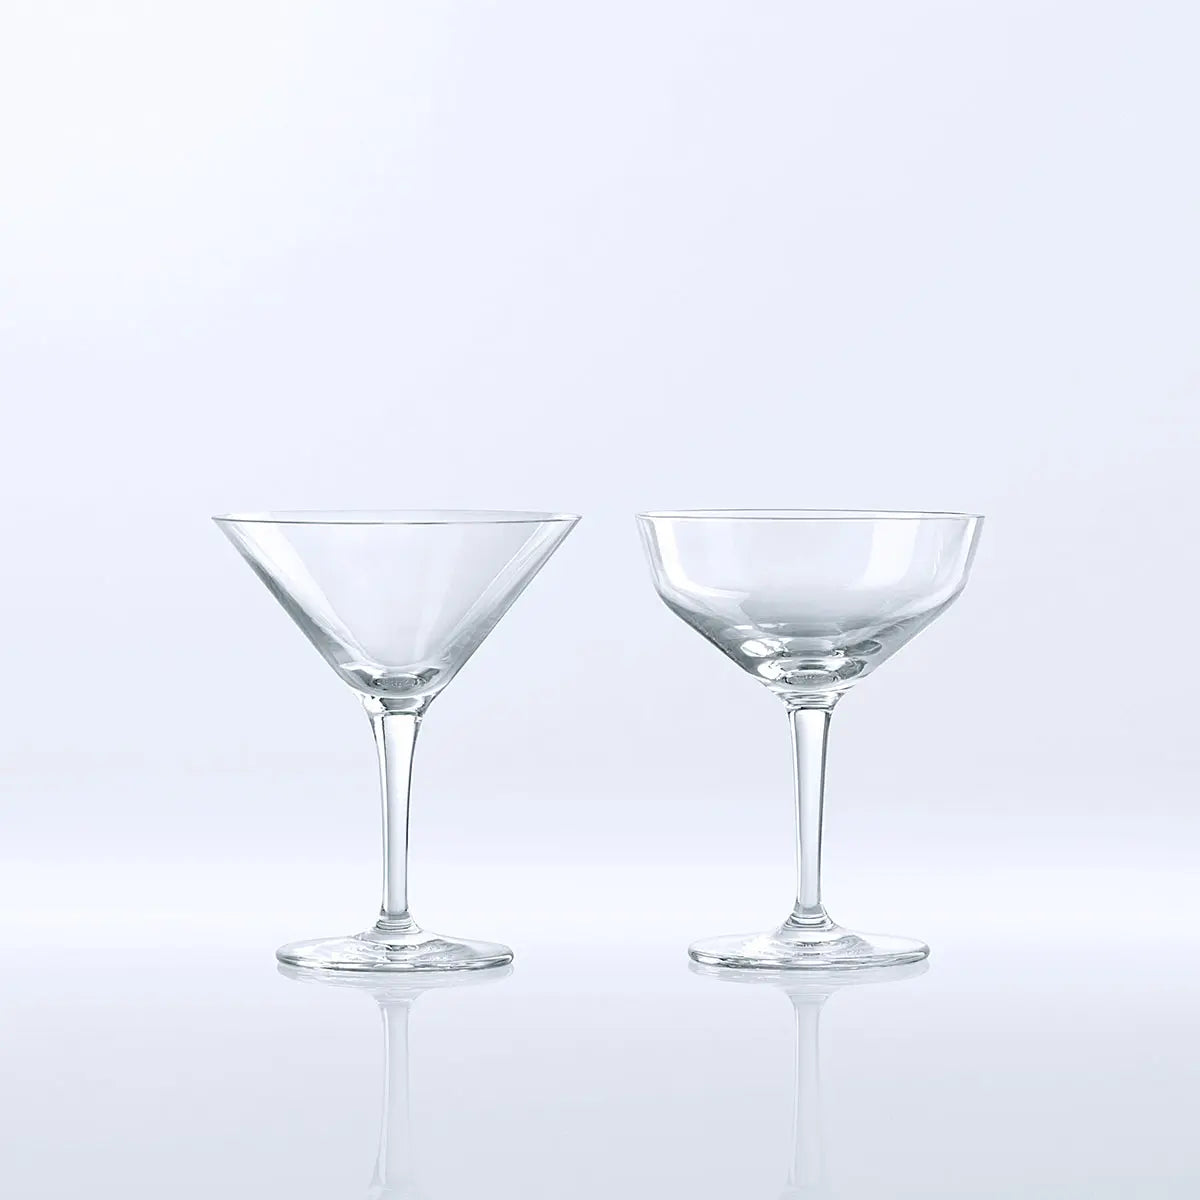 Empty Fortessa Classic Bar Martini Glass set next to another glass